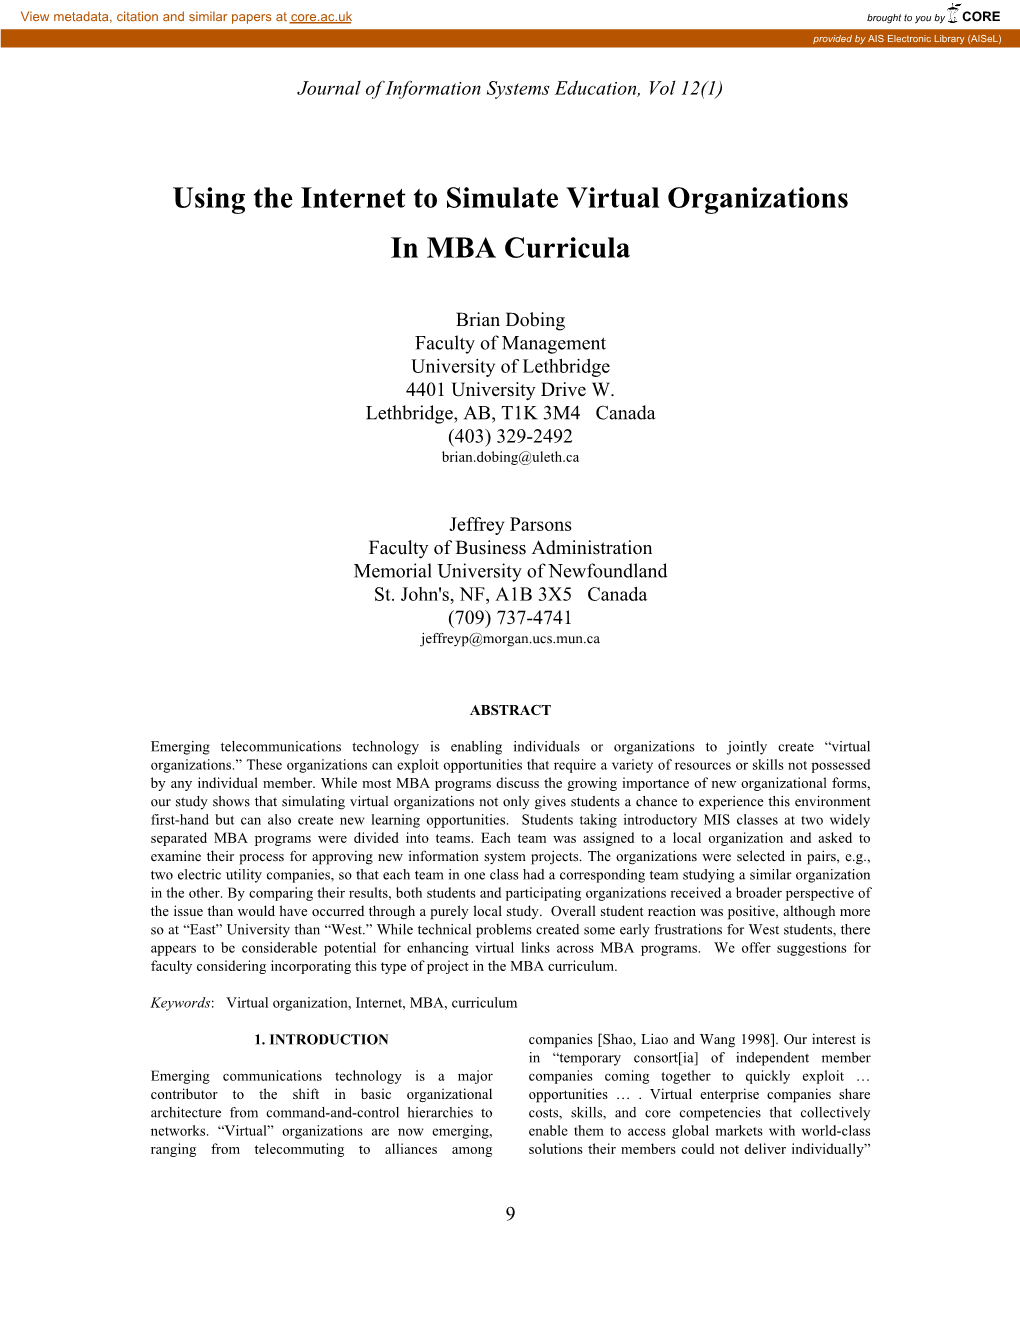 Using the Internet to Simulate Virtual Organizations in MBA Curricula